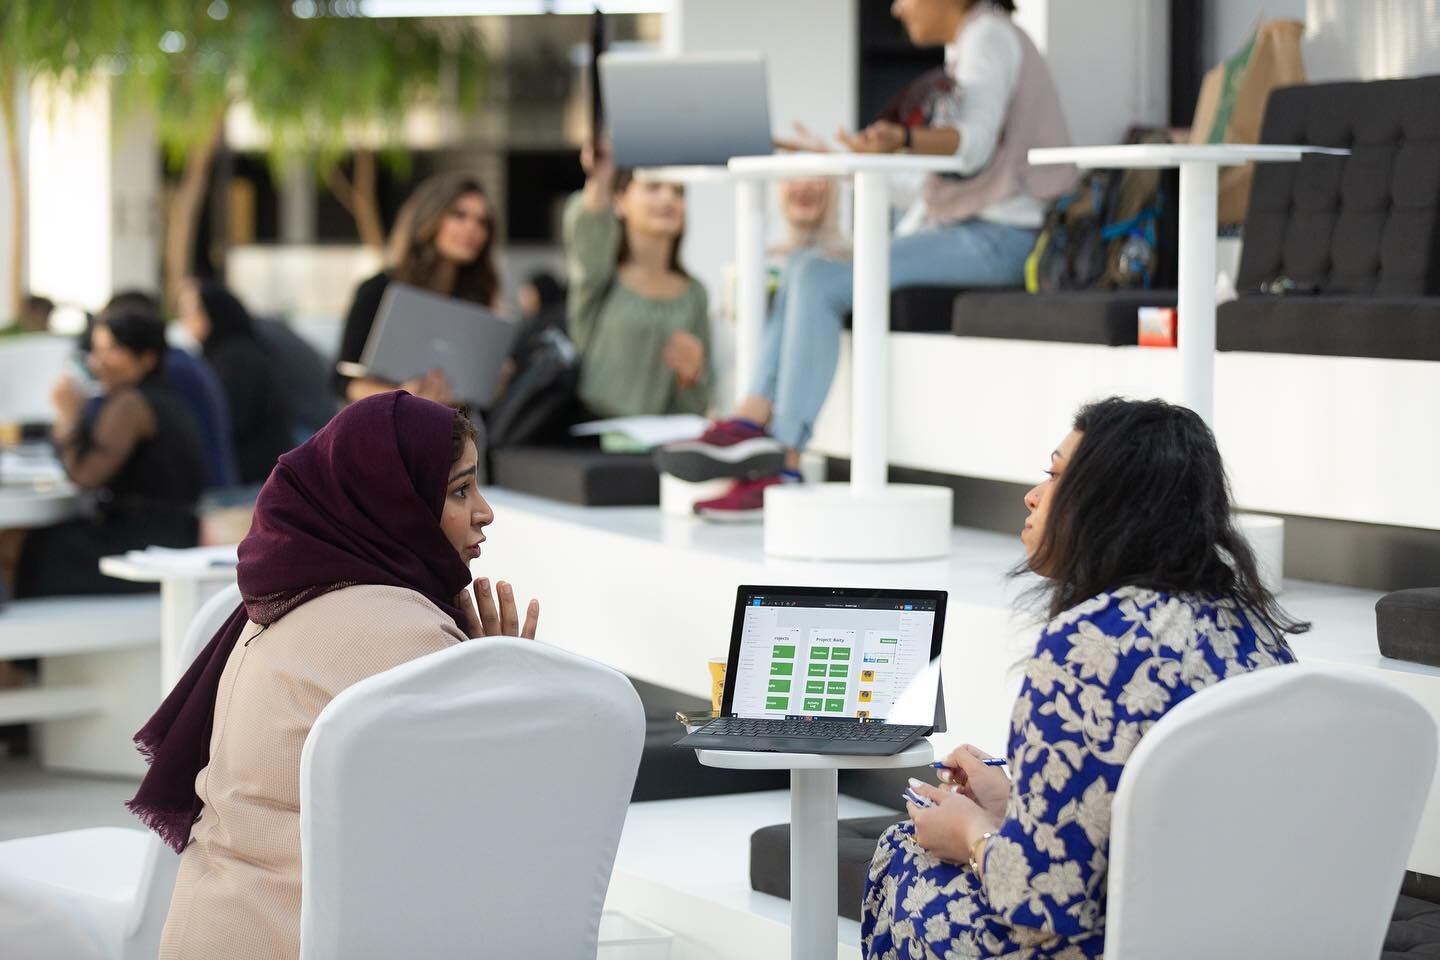 Mentoring sessions in progress 💬

.
.
.
#coworking #coworkingspace #startup #startupbusiness #openspaces #business #productivity #work #workday #office #mentoring #space #manama #bahrain